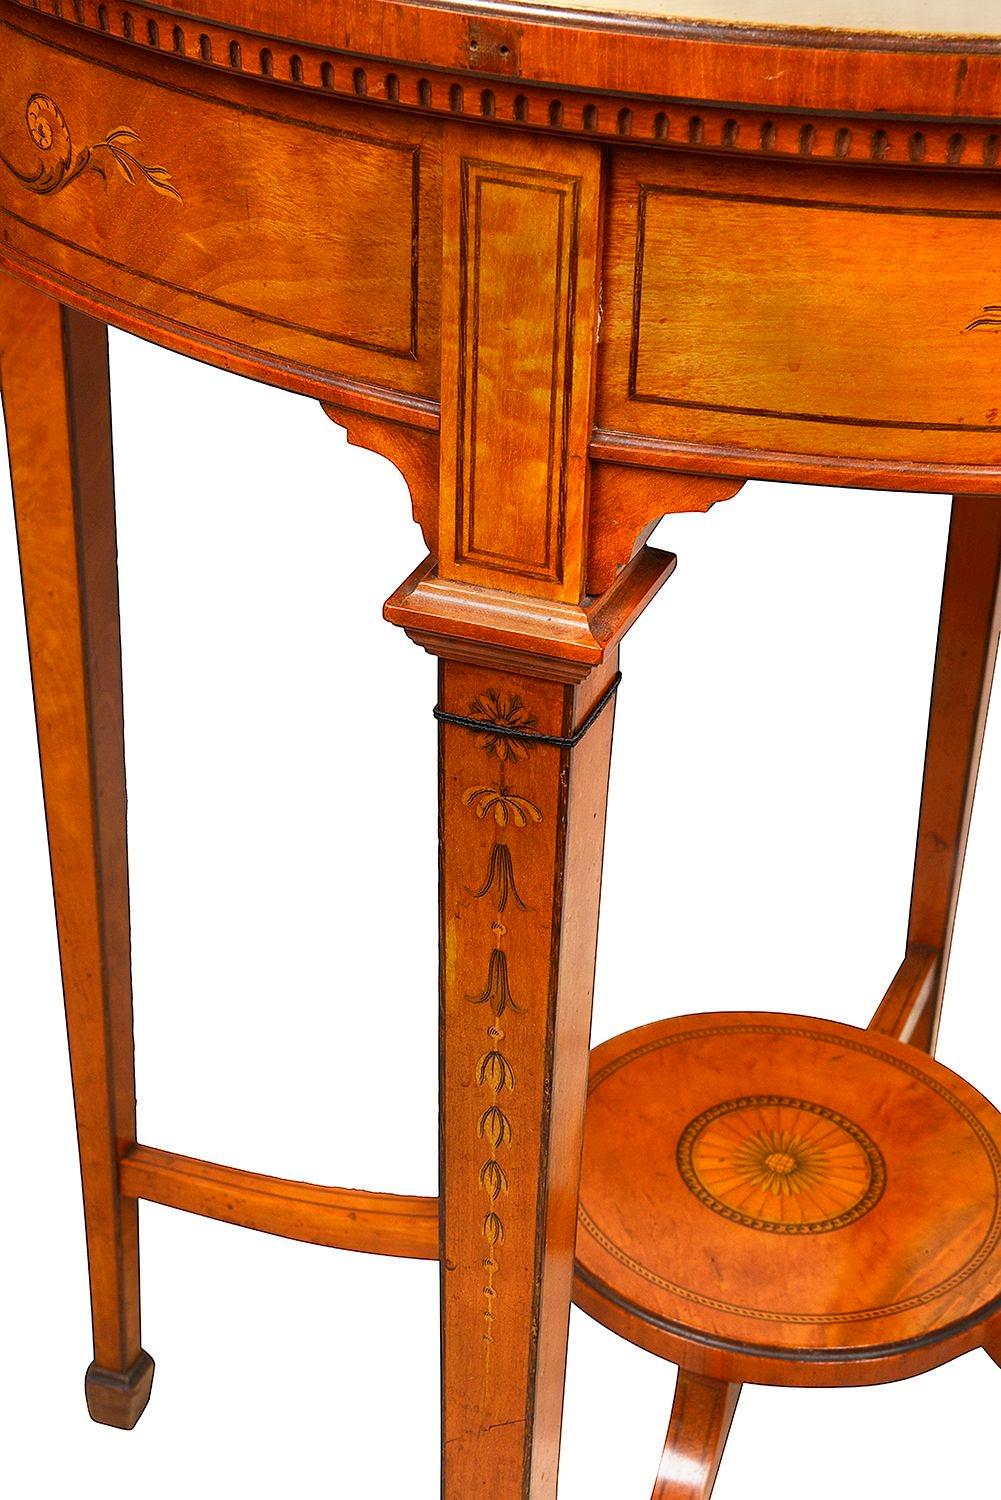 Veneer Sheraton Revival Satinwood Inlaid Side Table, 19th Century For Sale